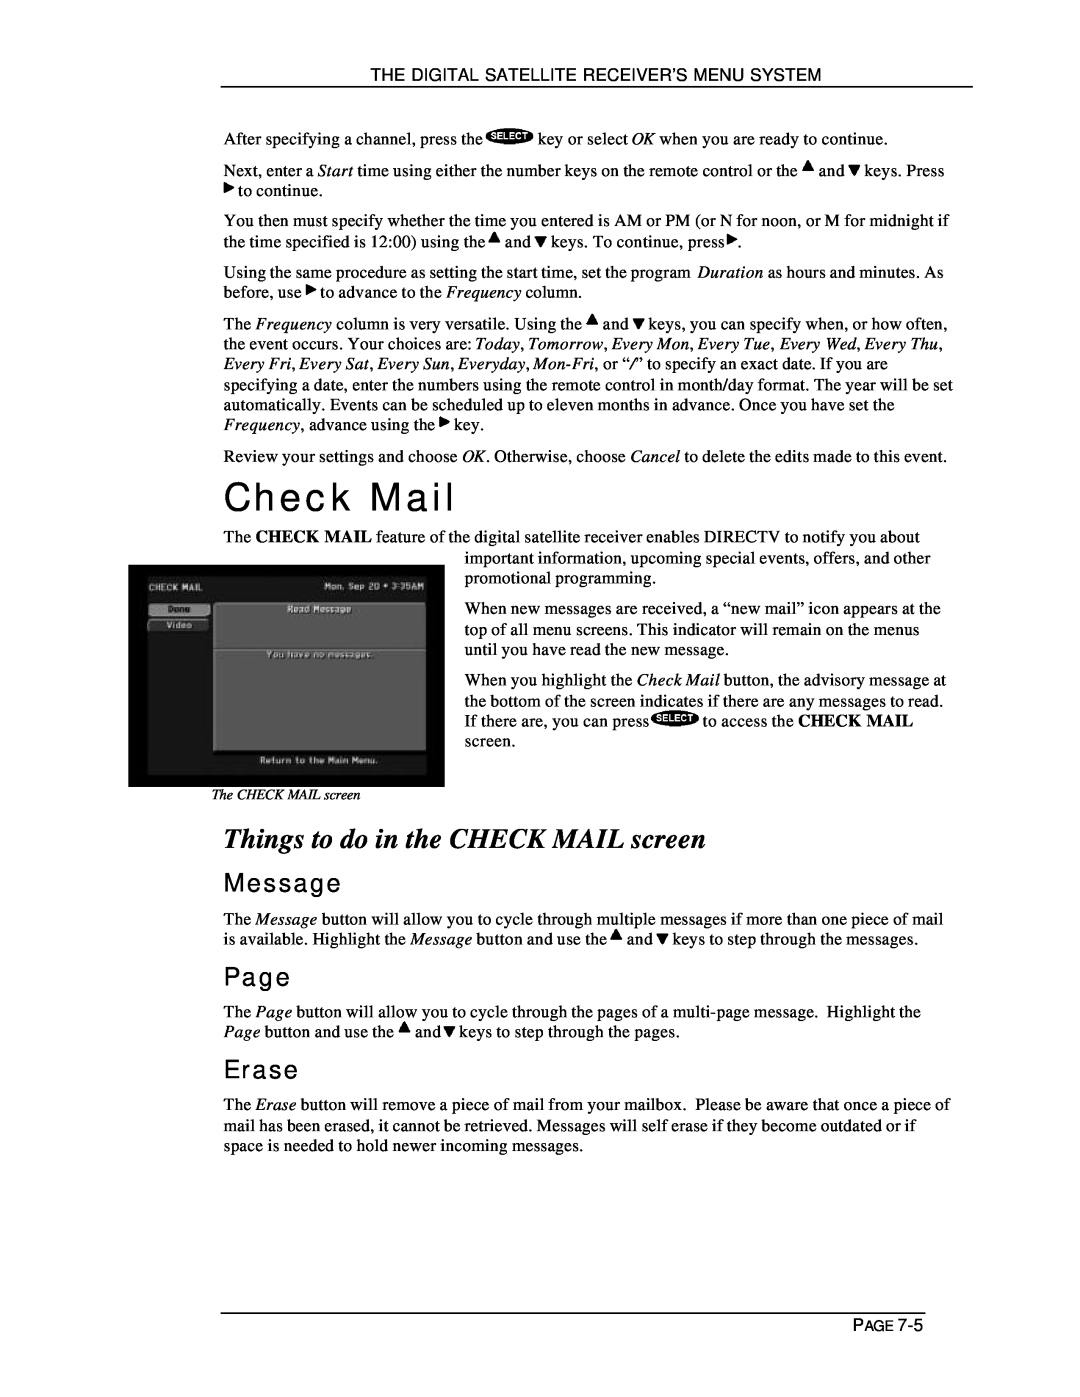 DirecTV HIRD-E11, HIRD-E25 owner manual Check Mail, Things to do in the CHECK MAIL screen, Message, Page, Erase 